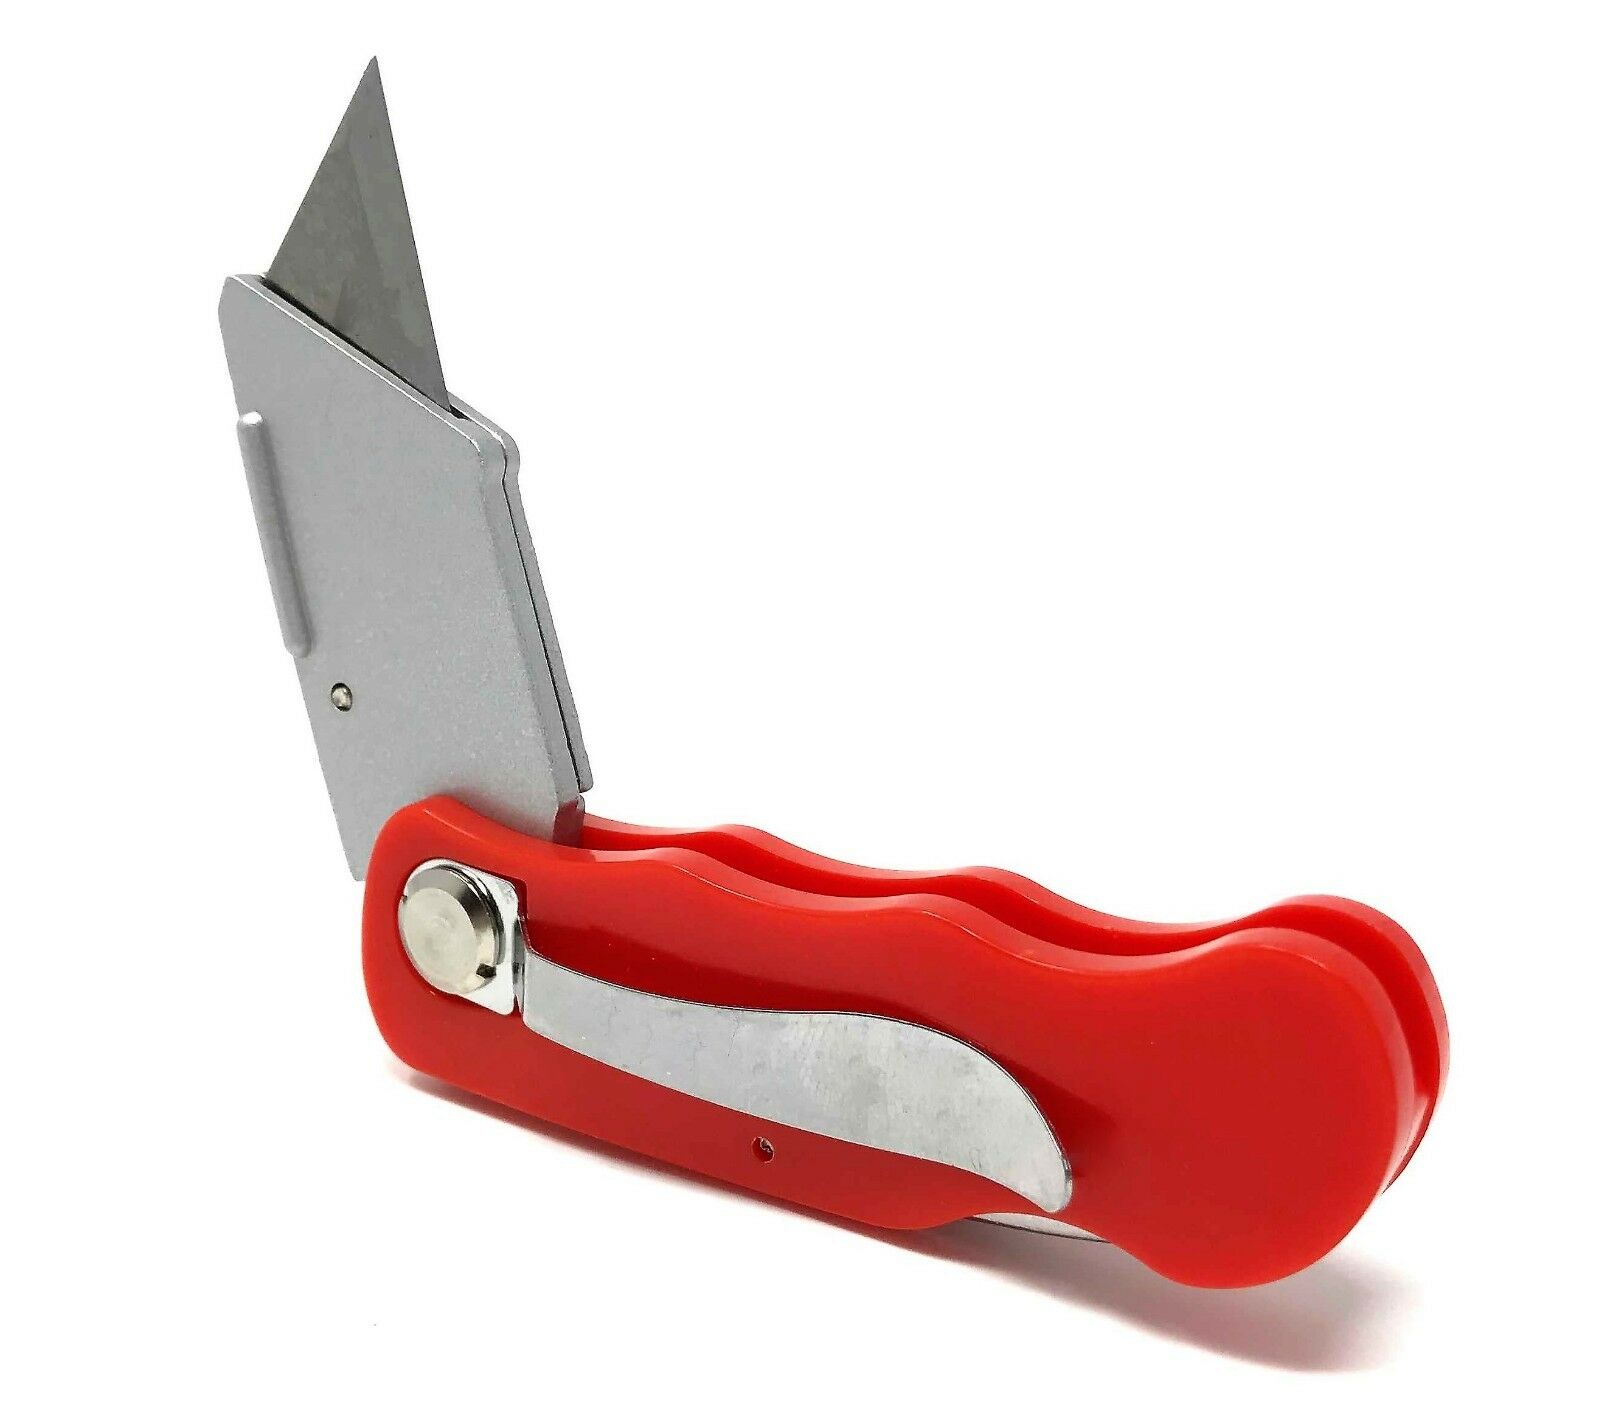 Folding Utility Pocket Knife Box Cutter With Lock Blade Red 6 Blades